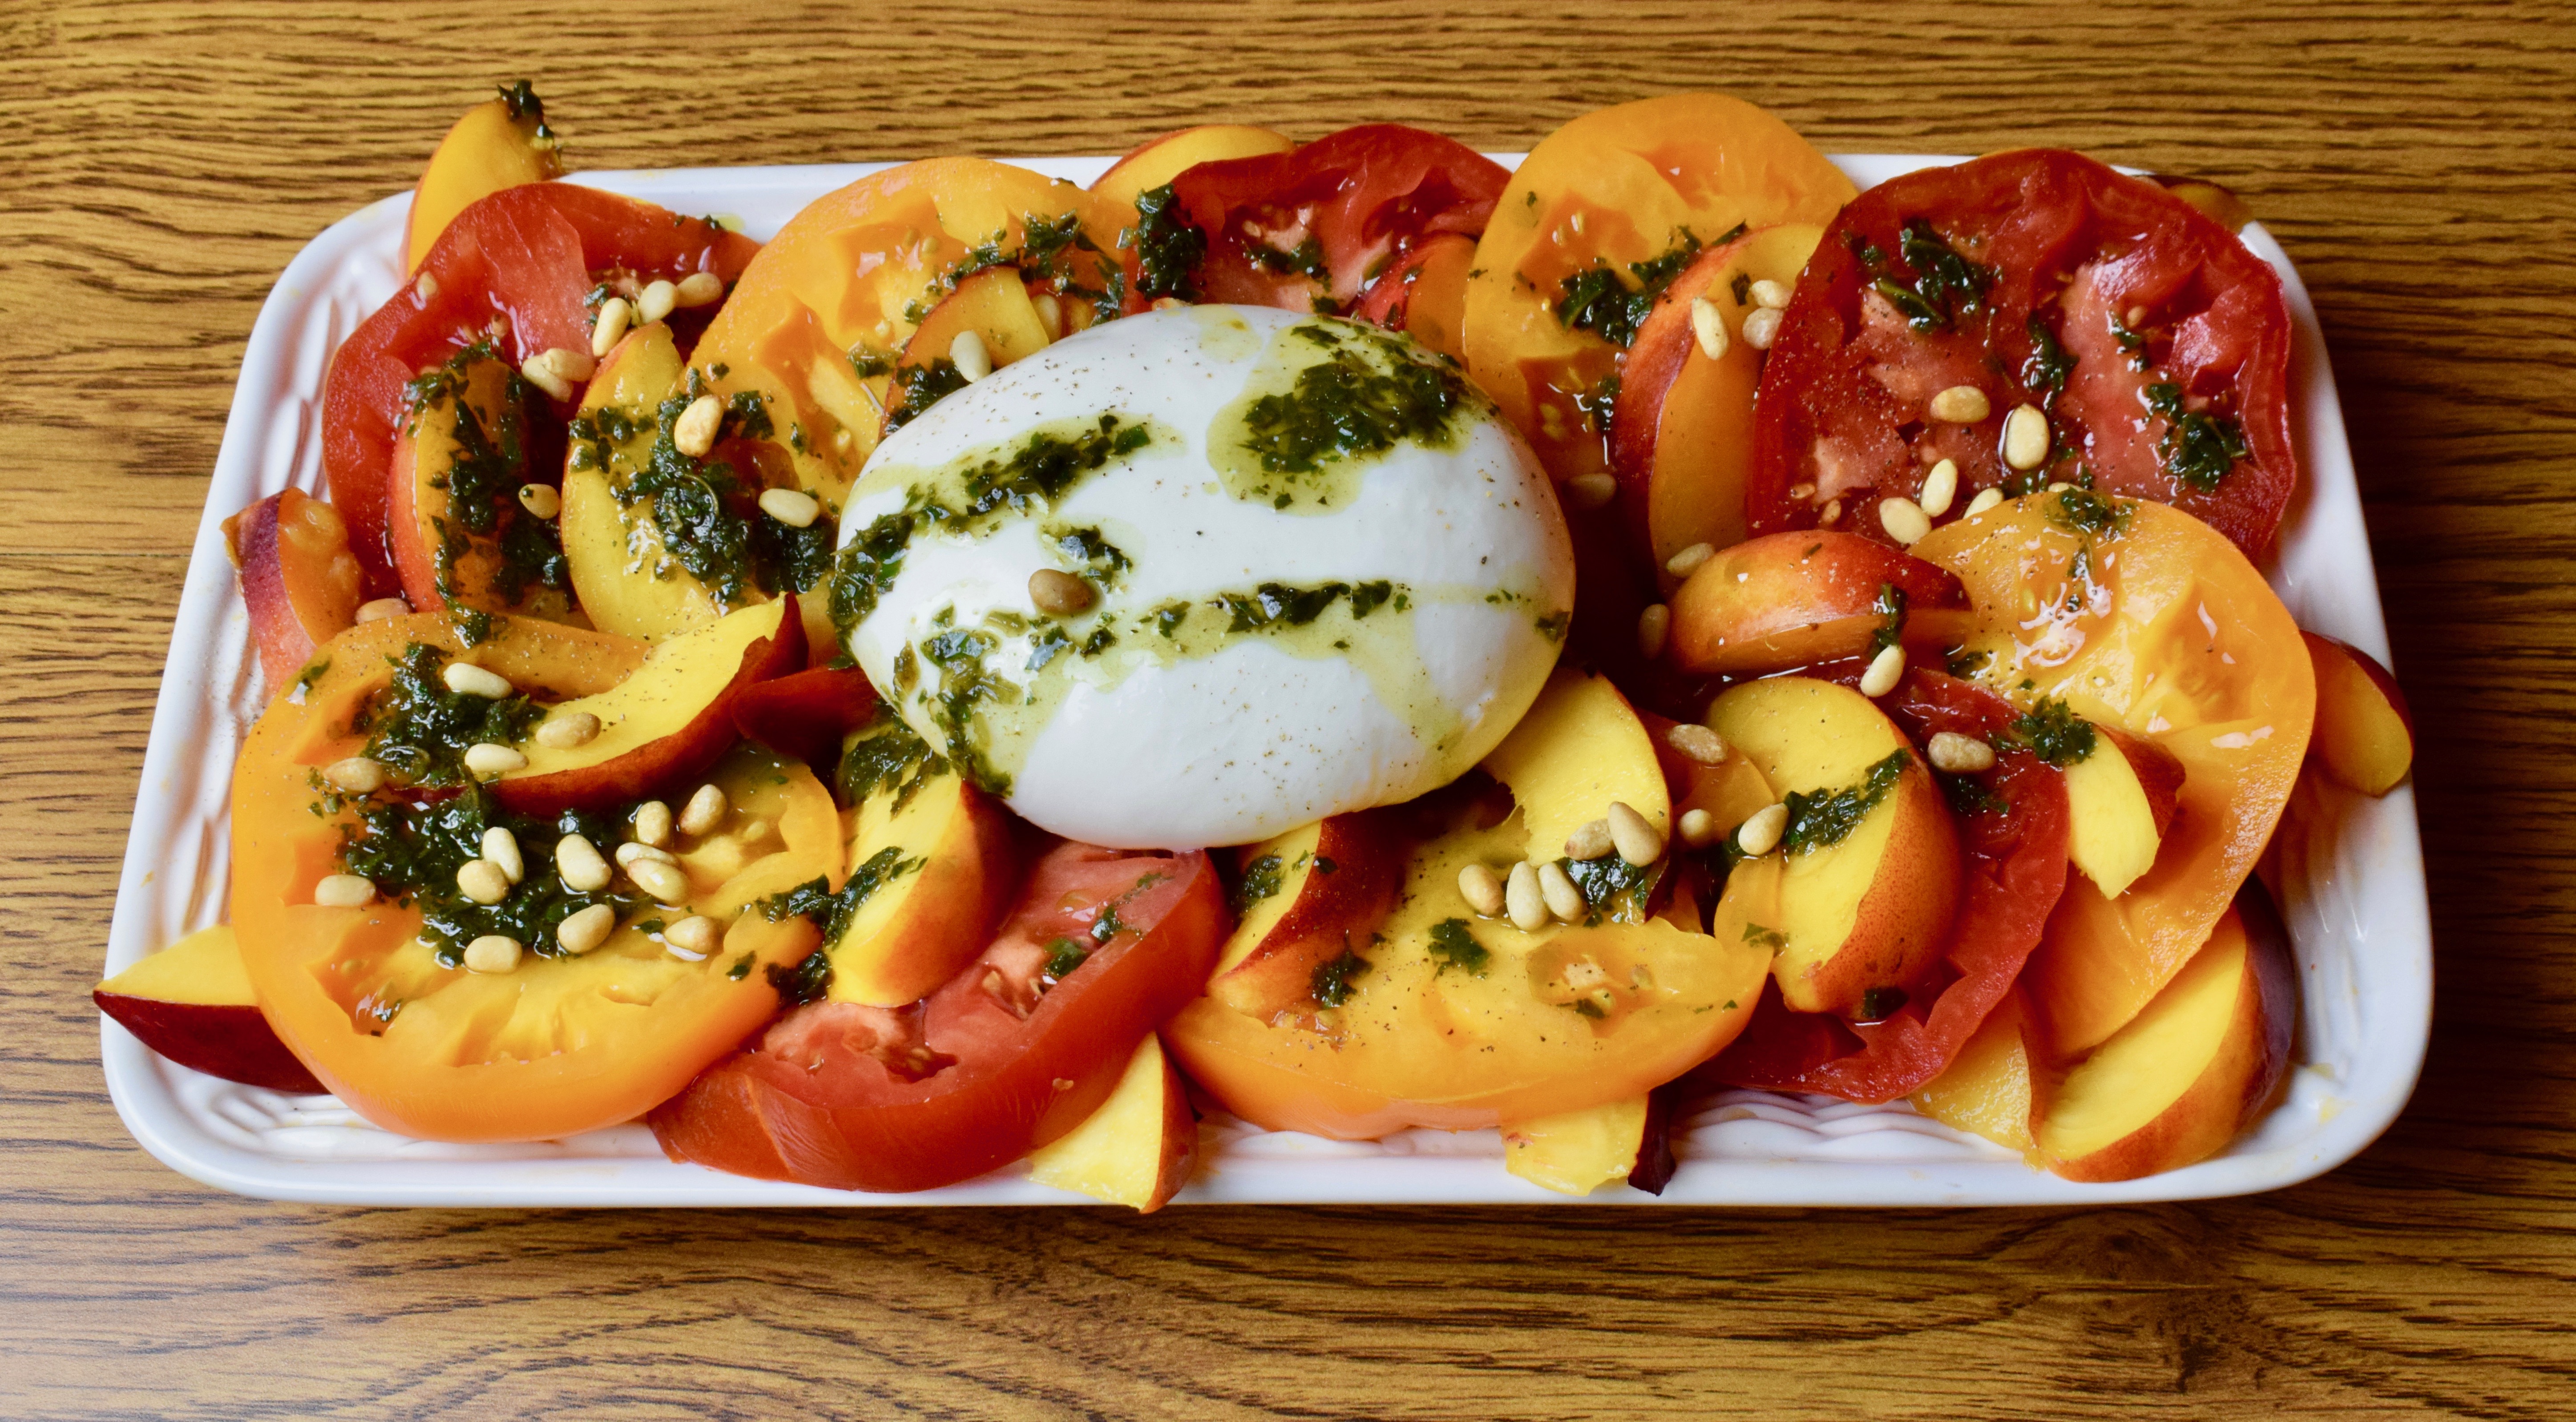 Platter of Burrata with Heirloom Tomatoes and Nectarines